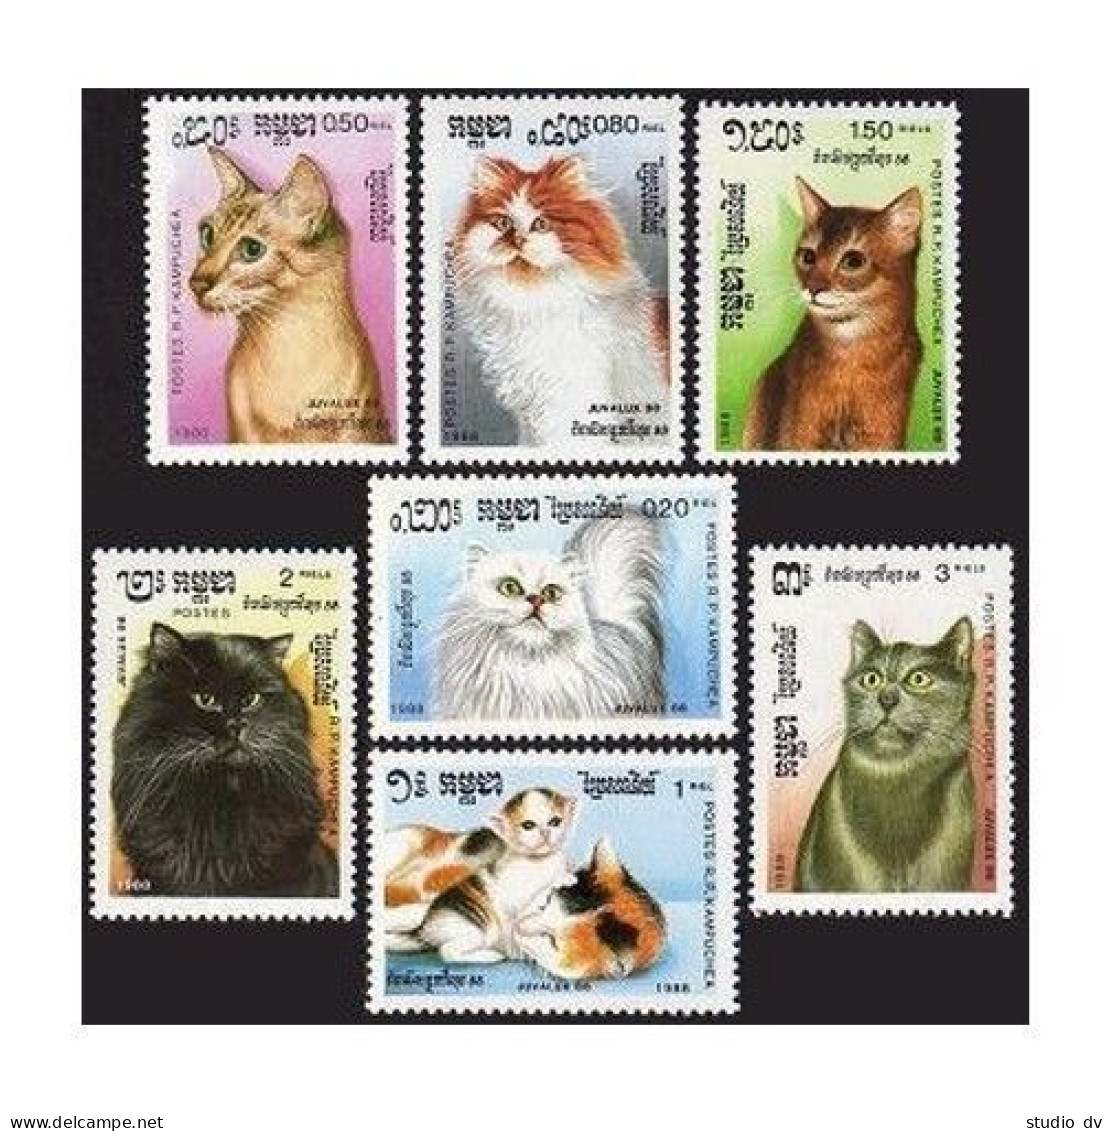 Cambodia 852-858,859, MNH. Michel 930-936, Bl.158. JUVALUX-1988. Various Cats. - Cambodge